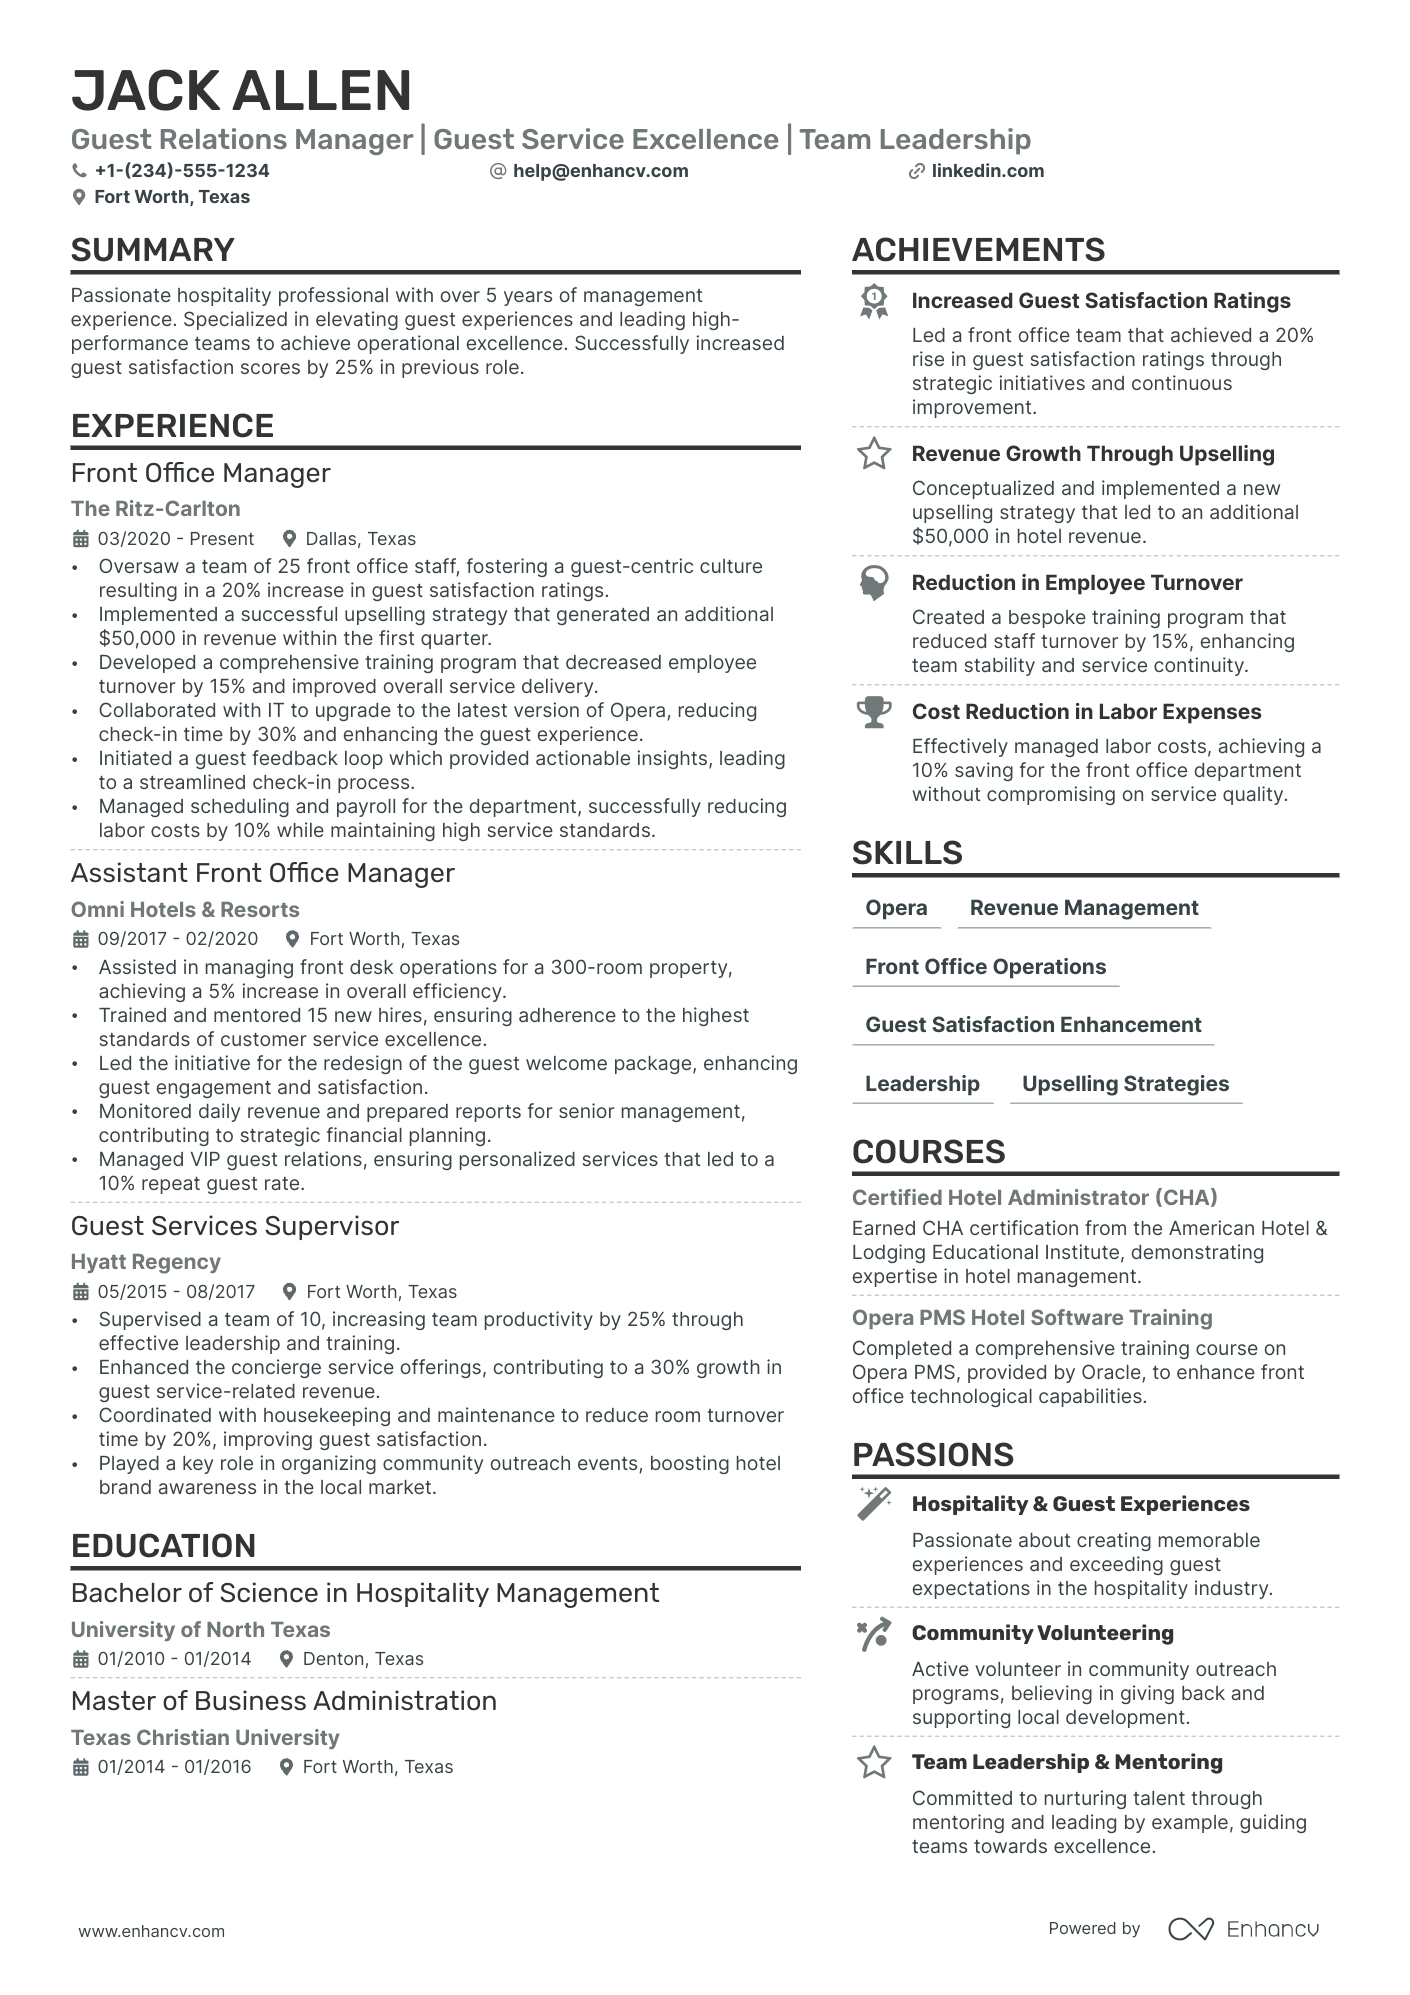 Guest Relations Manager resume example